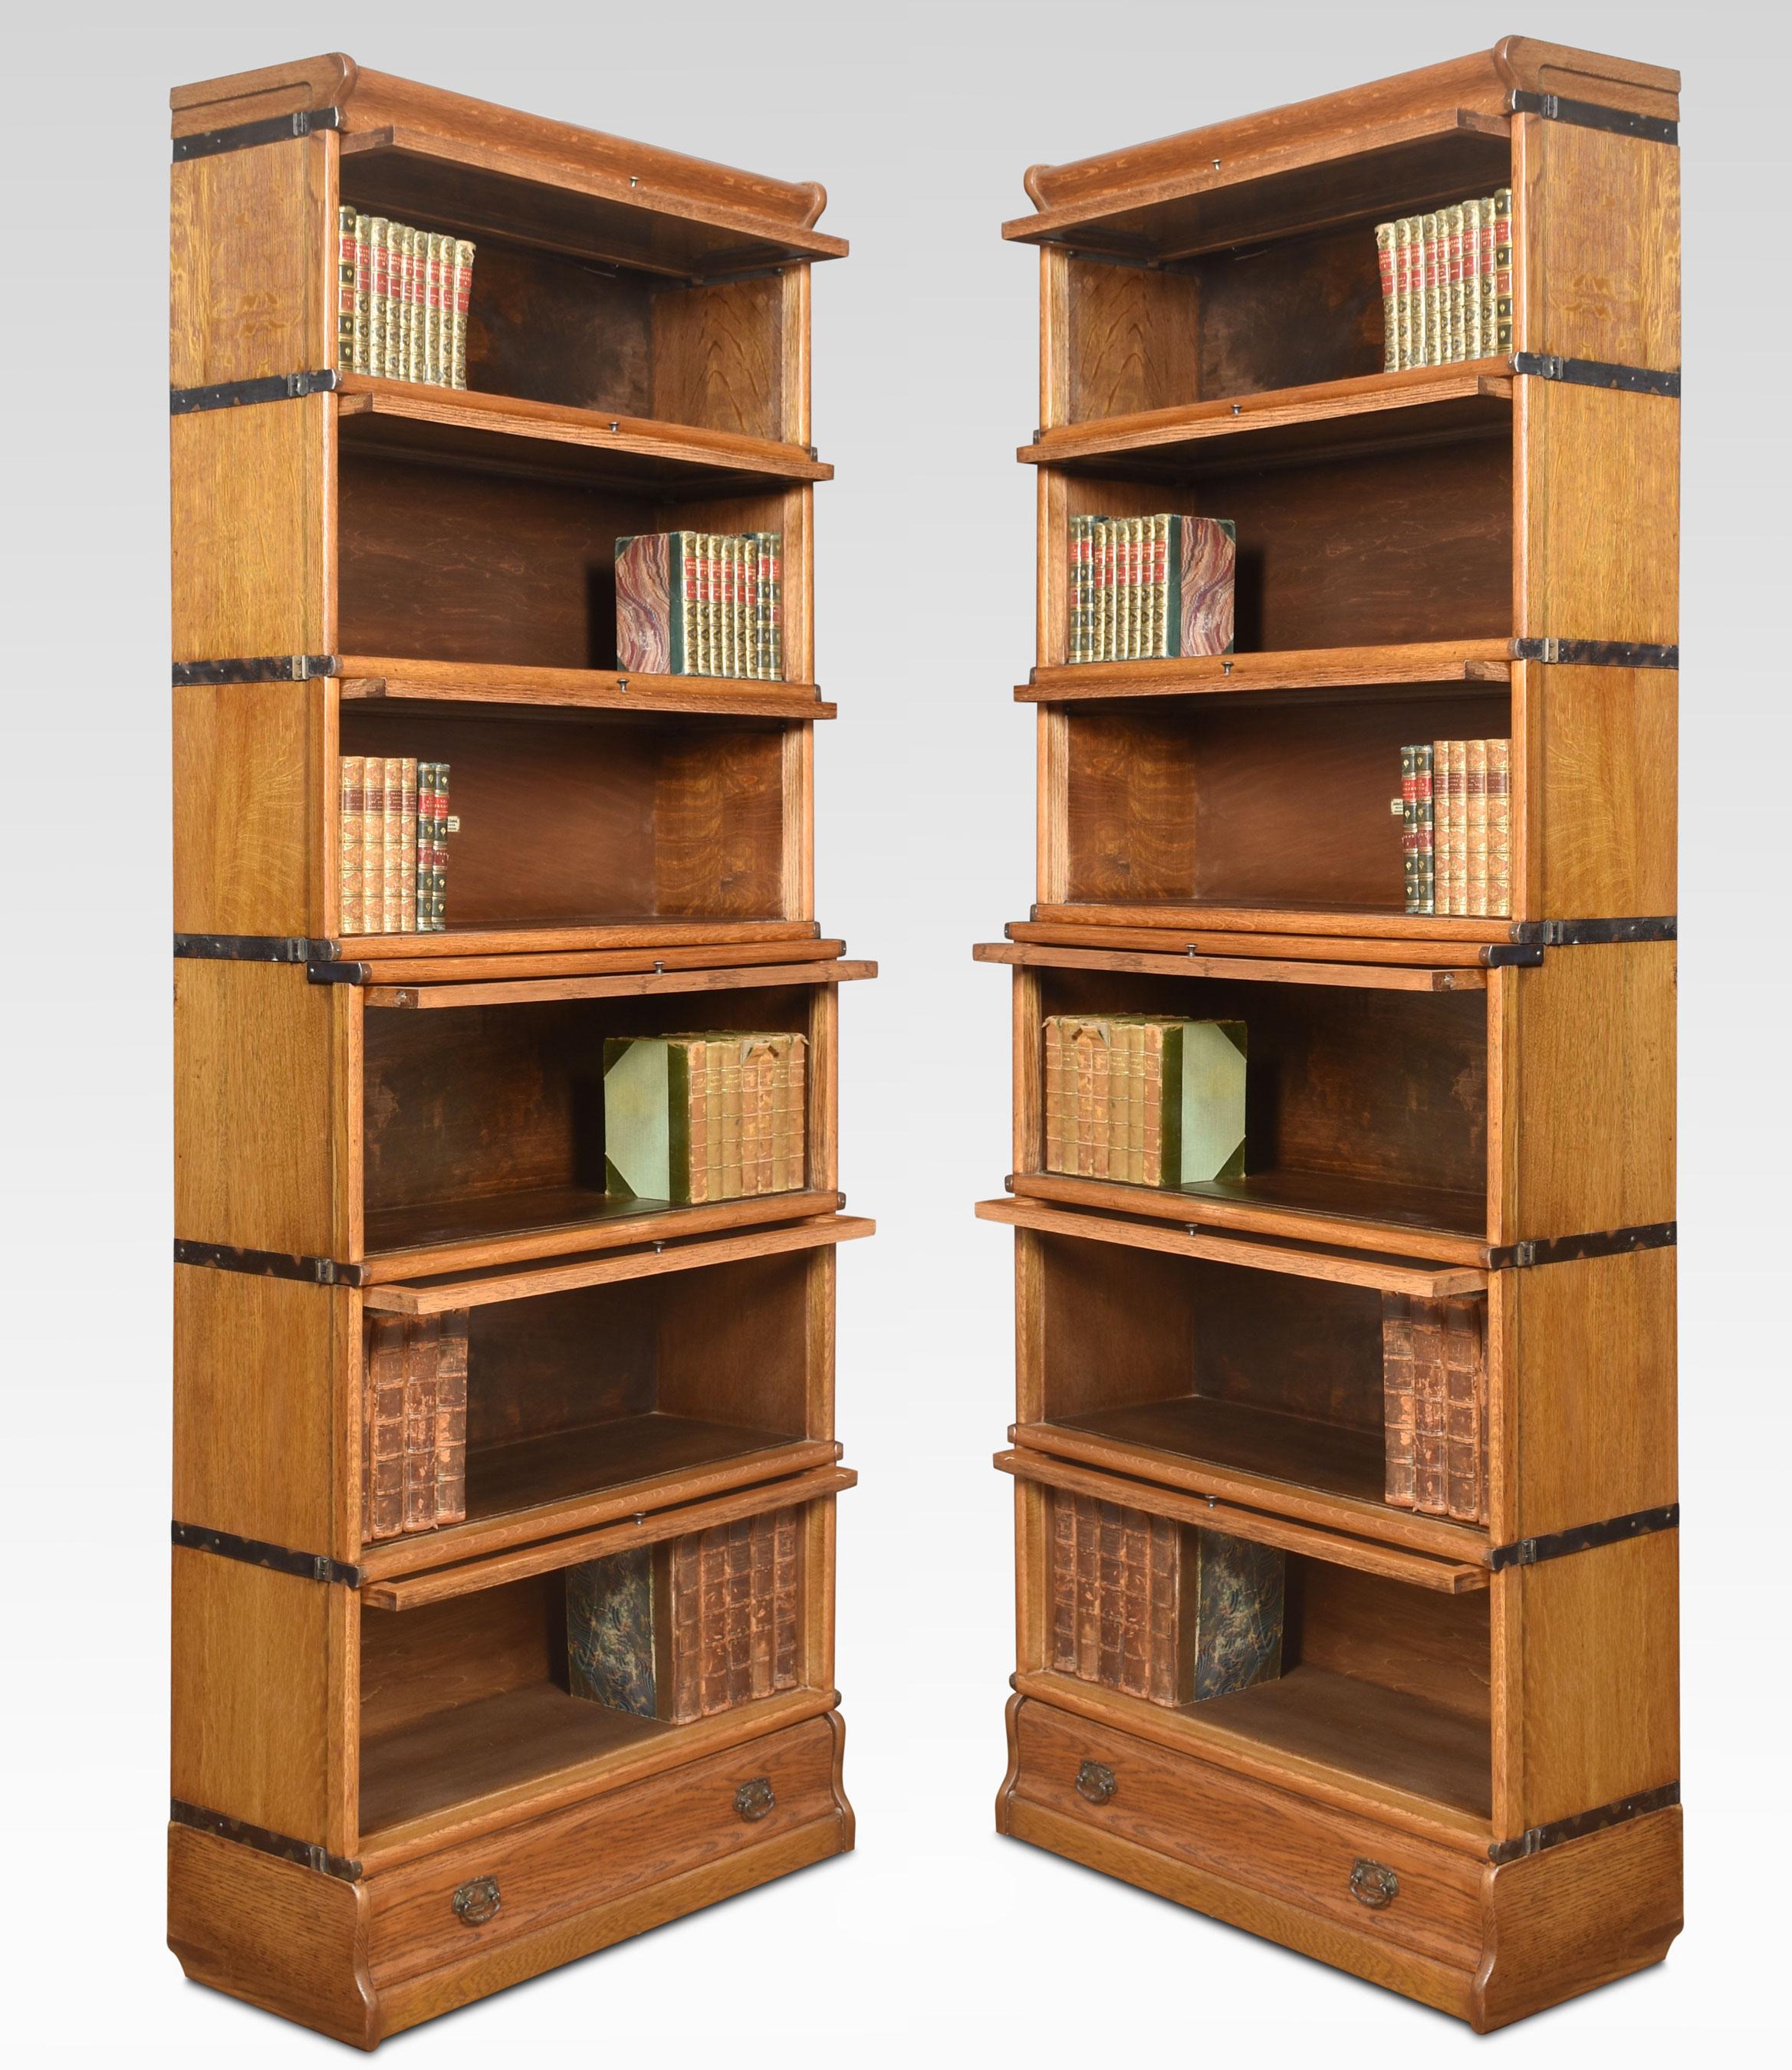 Pair of oak globe Wernicke six-section bookcases, the moulded top above six graduated sections all having glazed doors, raised up on plinth base fitted with a drawer.
Dimensions
Height 81.5 Inches
Width 34 Inches
Depth 12.5 Inches